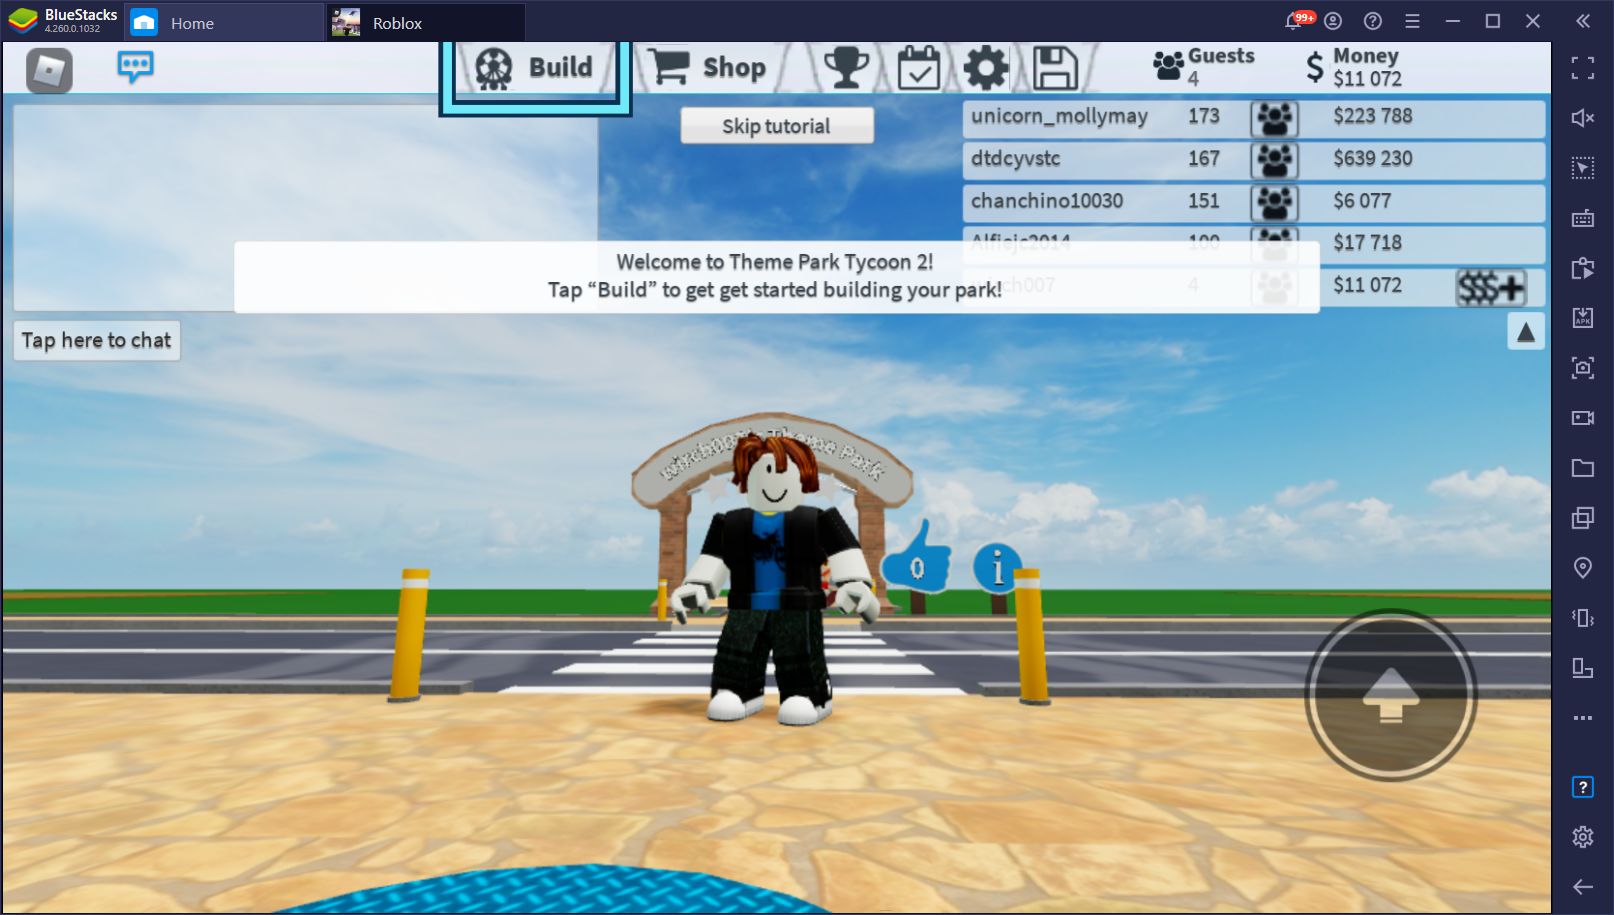 The Best Roblox Games To Play In 2021 Bluestacks - roblox 9 11 game